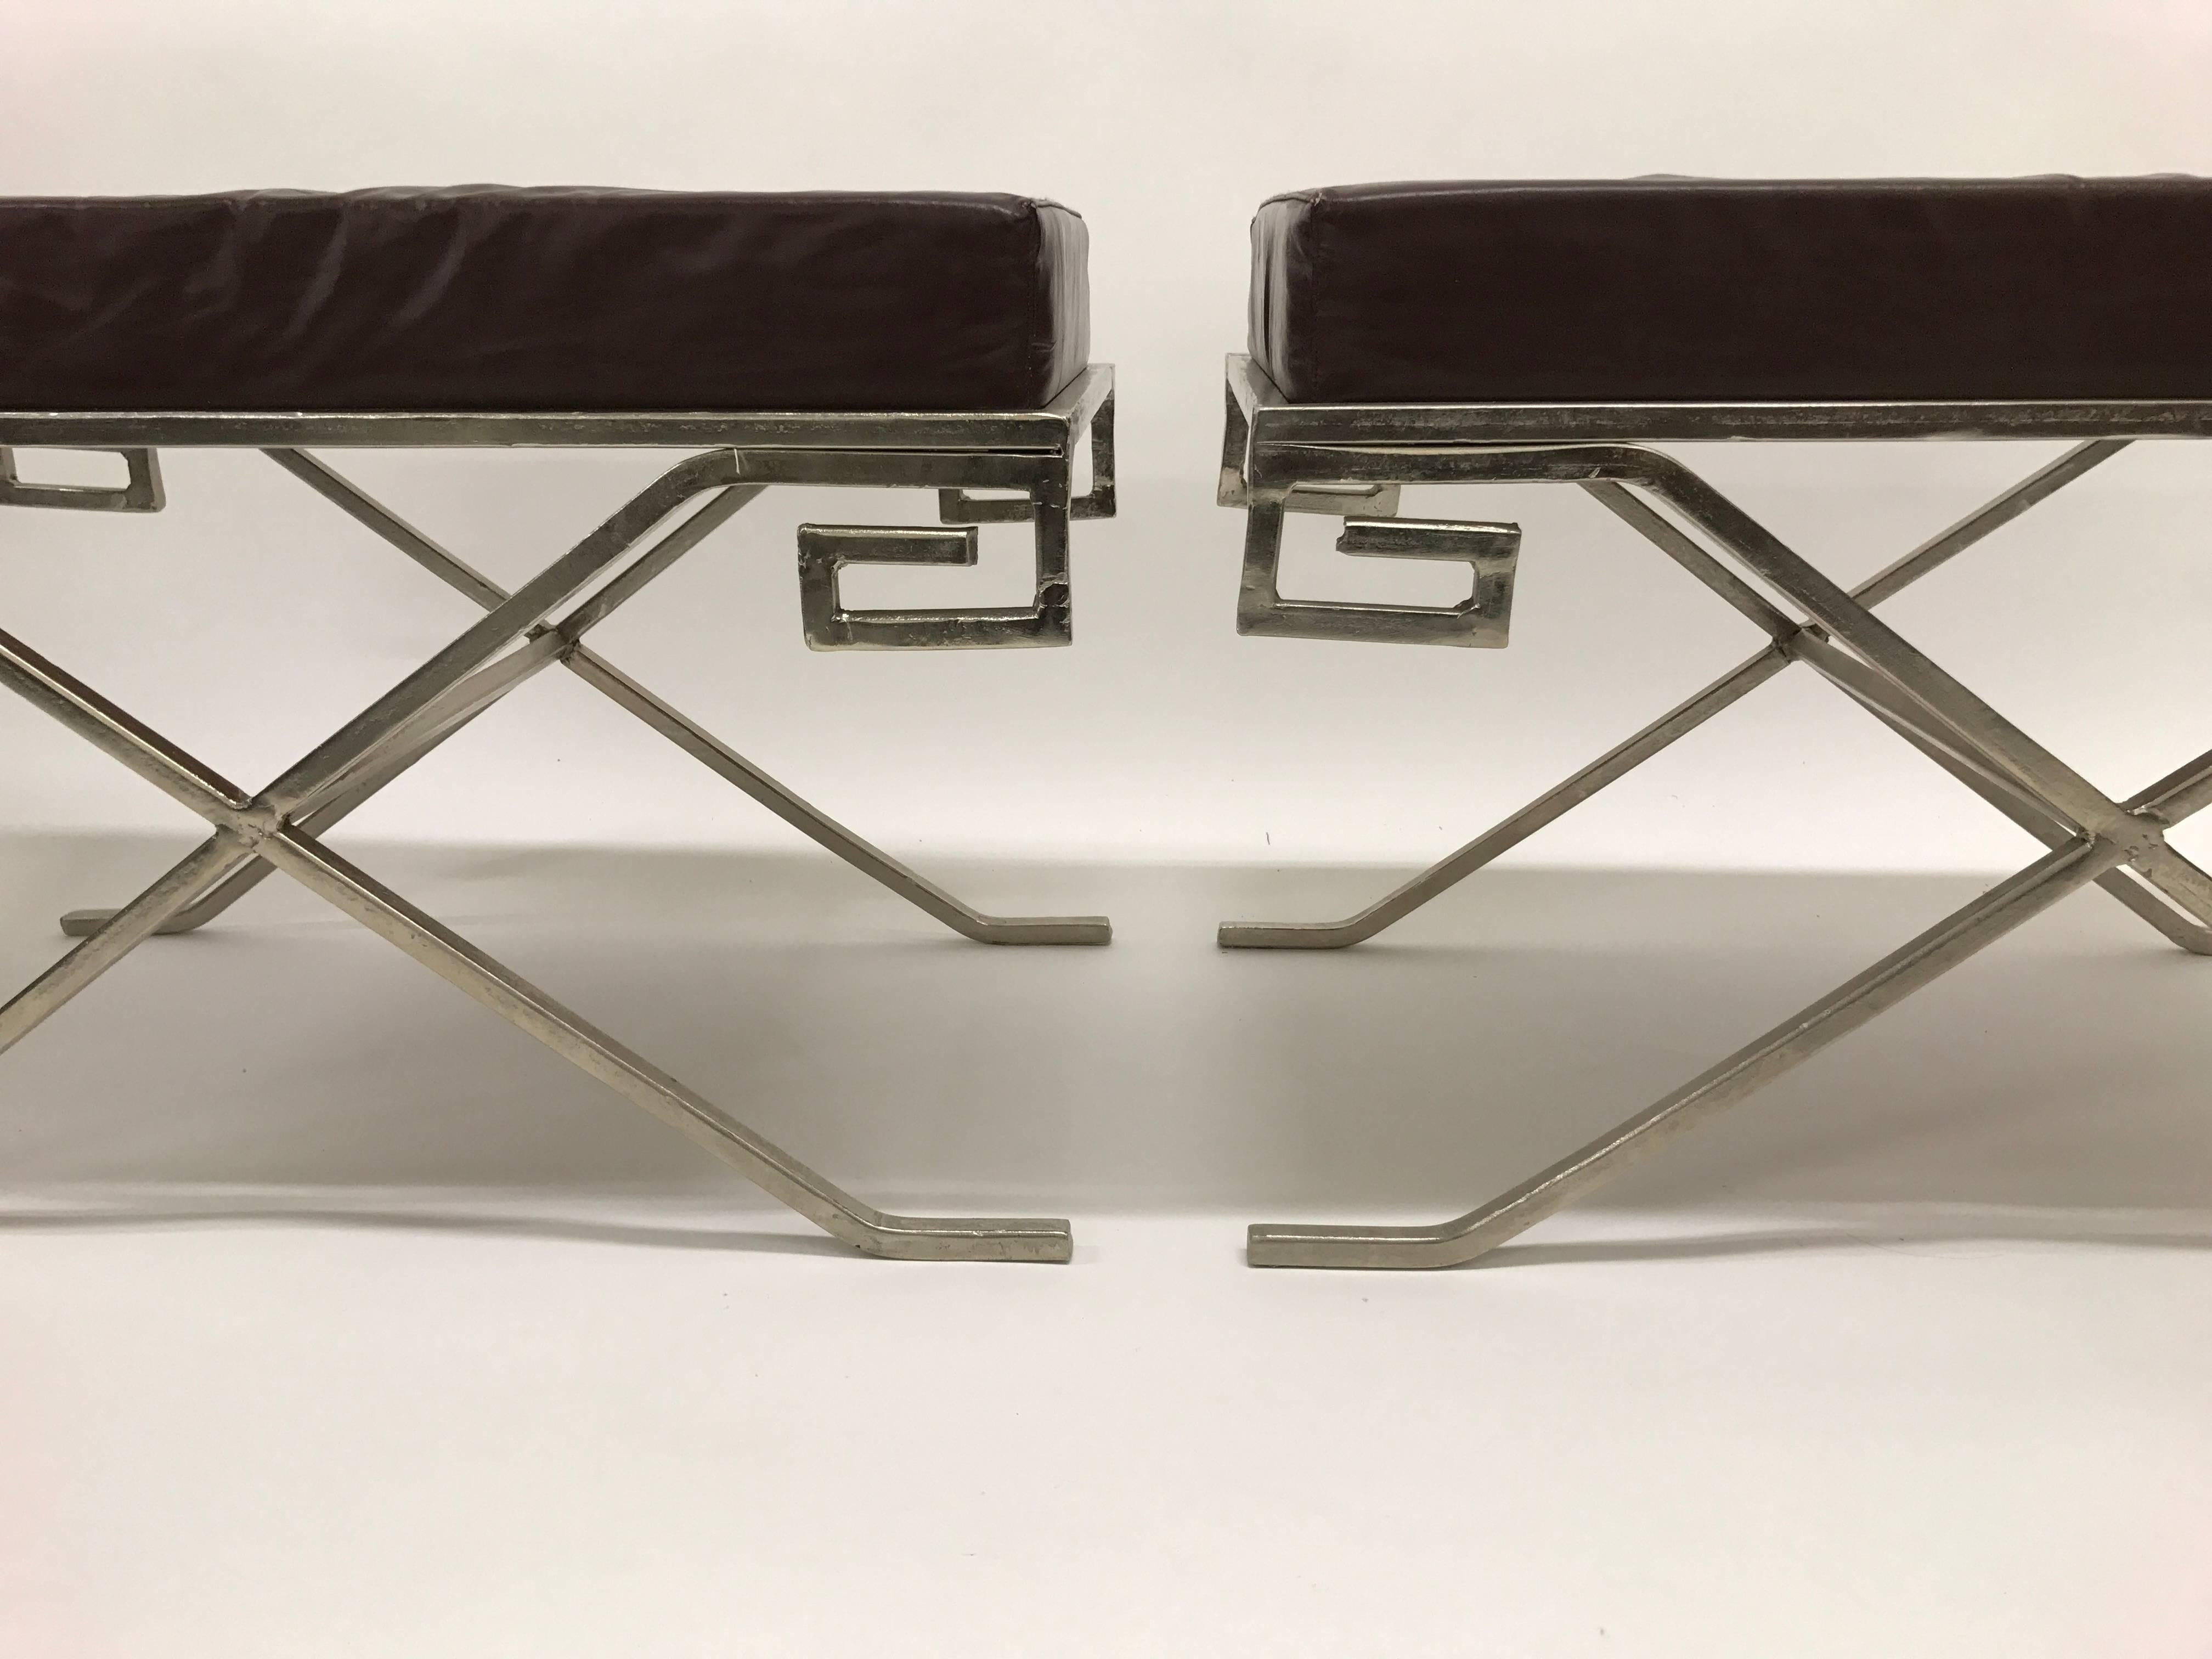 Pair of Modern Greek Key Neoclassical Benches after Jean Michel Frank In Good Condition For Sale In Lake Success, NY